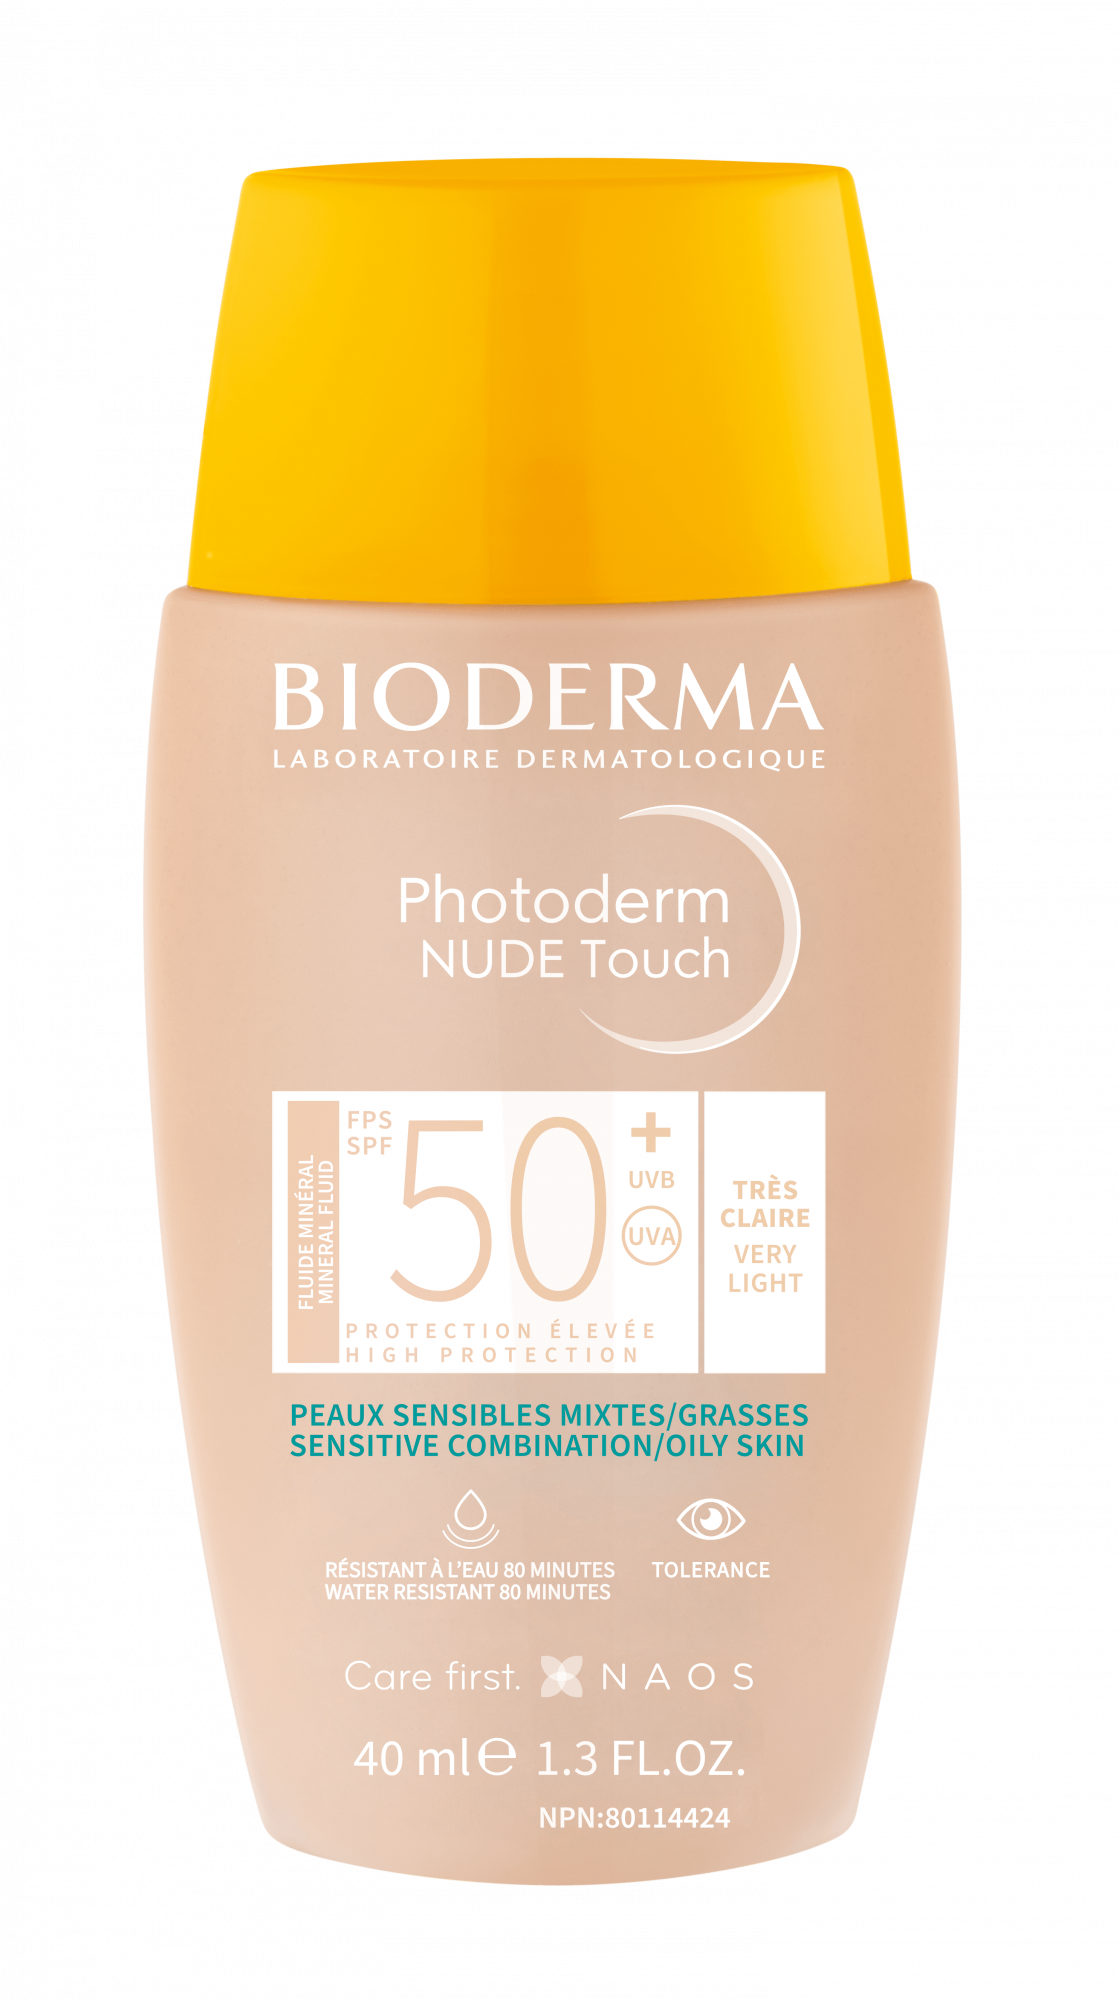 https://www.bioderma.ca/sites/ca/files/styles/fancybox_2000_2000/public/2022-03/FRONT_Photoderm-NUDE-Touch-SPF50plus-F40ml-28587B25-verylight-%20HD.png?itok=-n8q7bCj